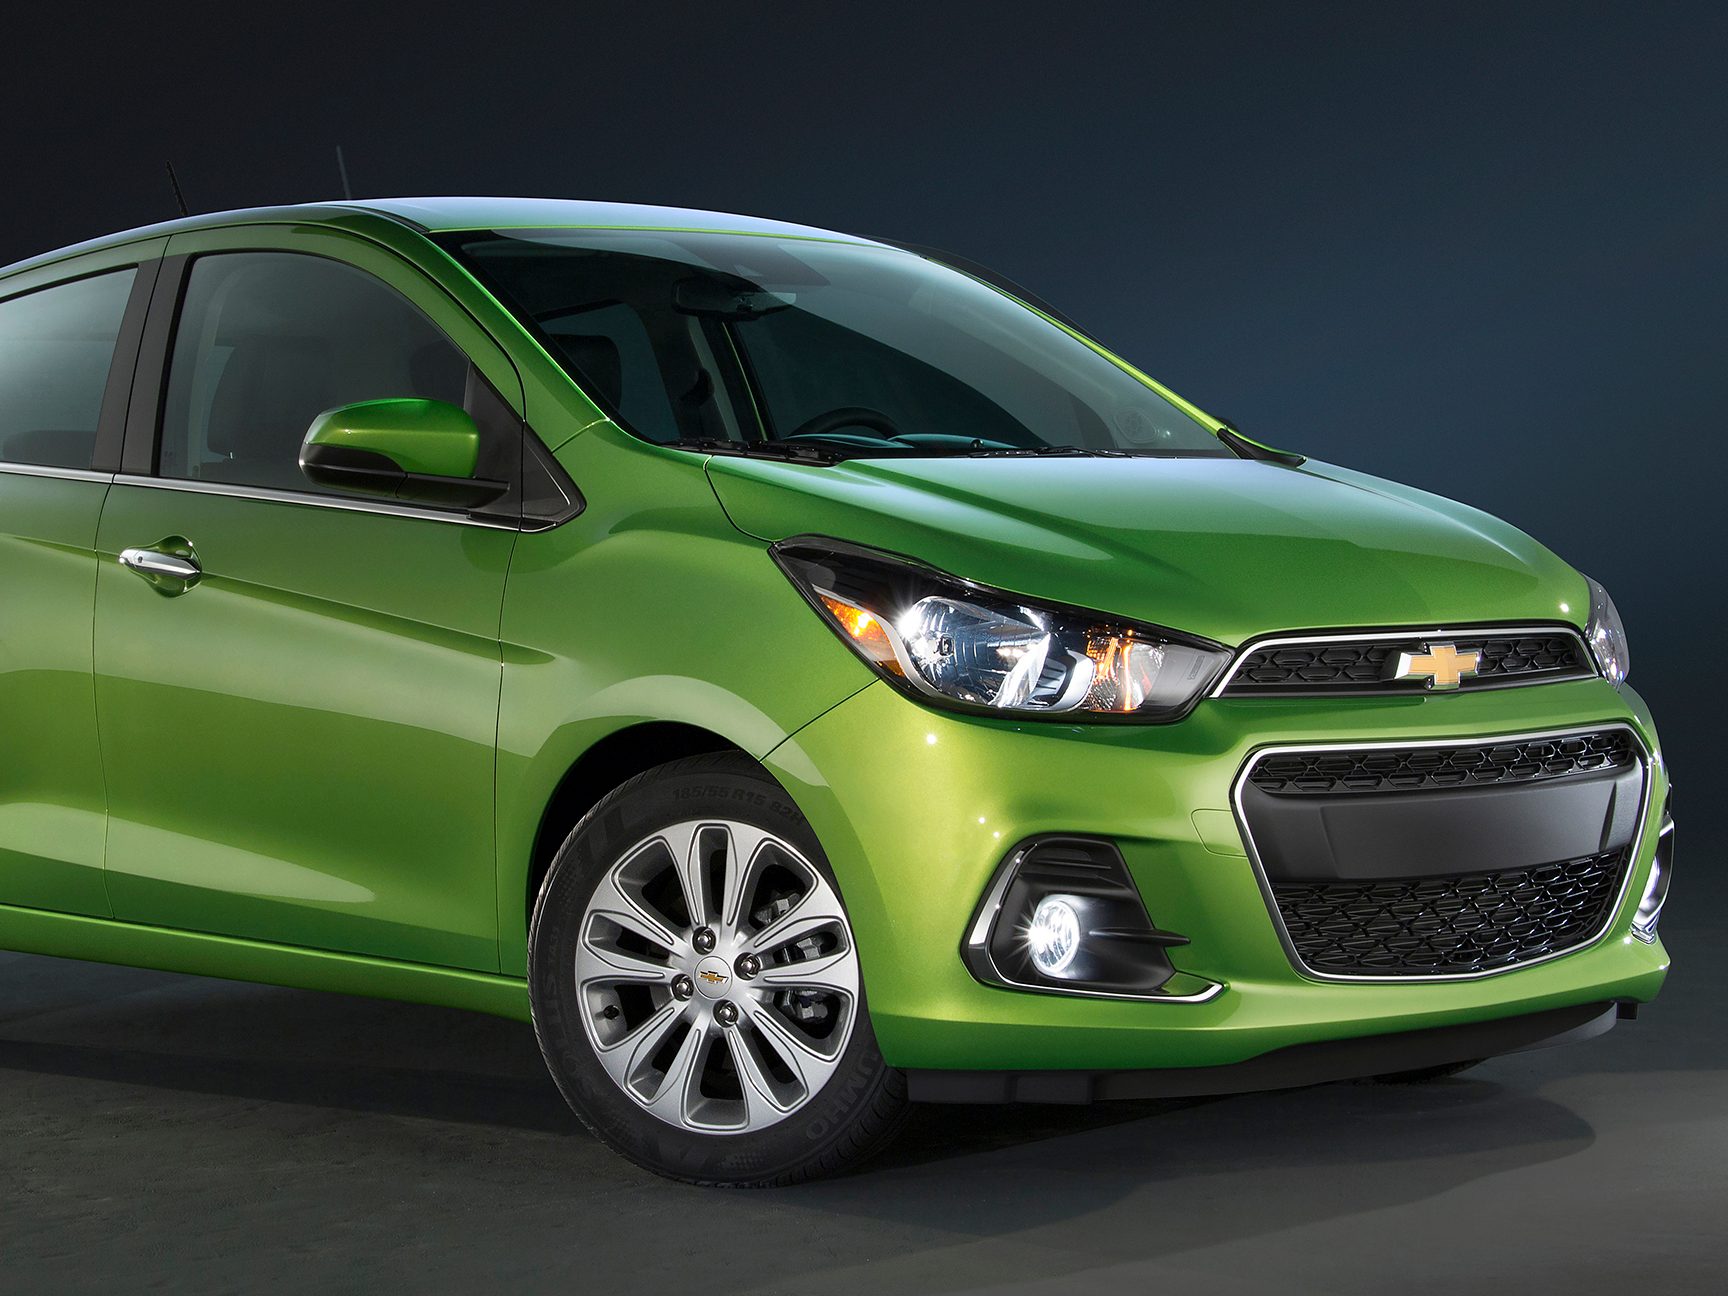 5 Things You Need to Know About the New Chevrolet Spark